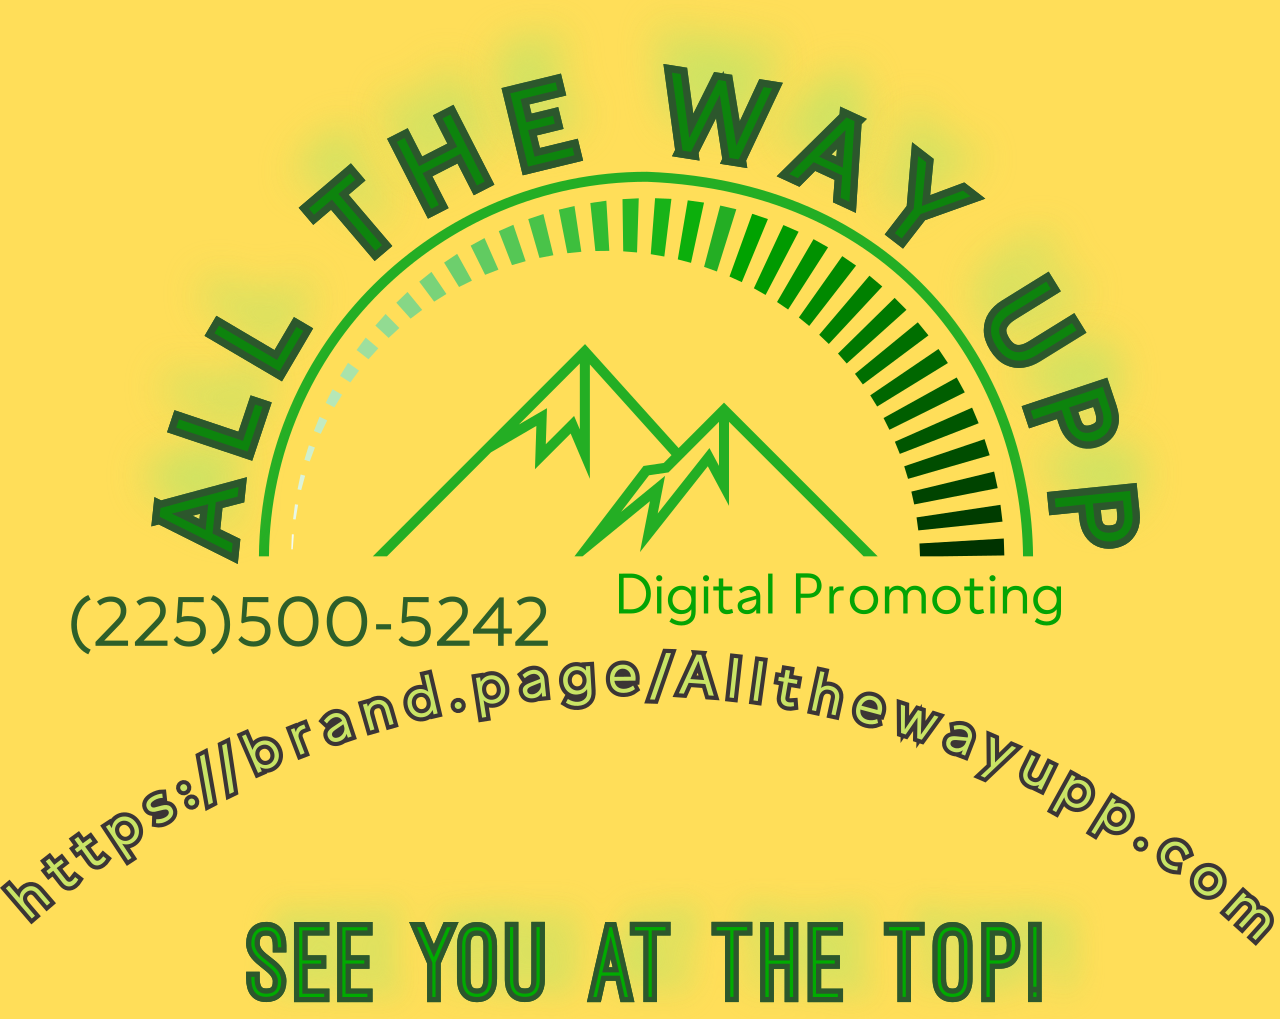 ALL THE WAY UP's web page